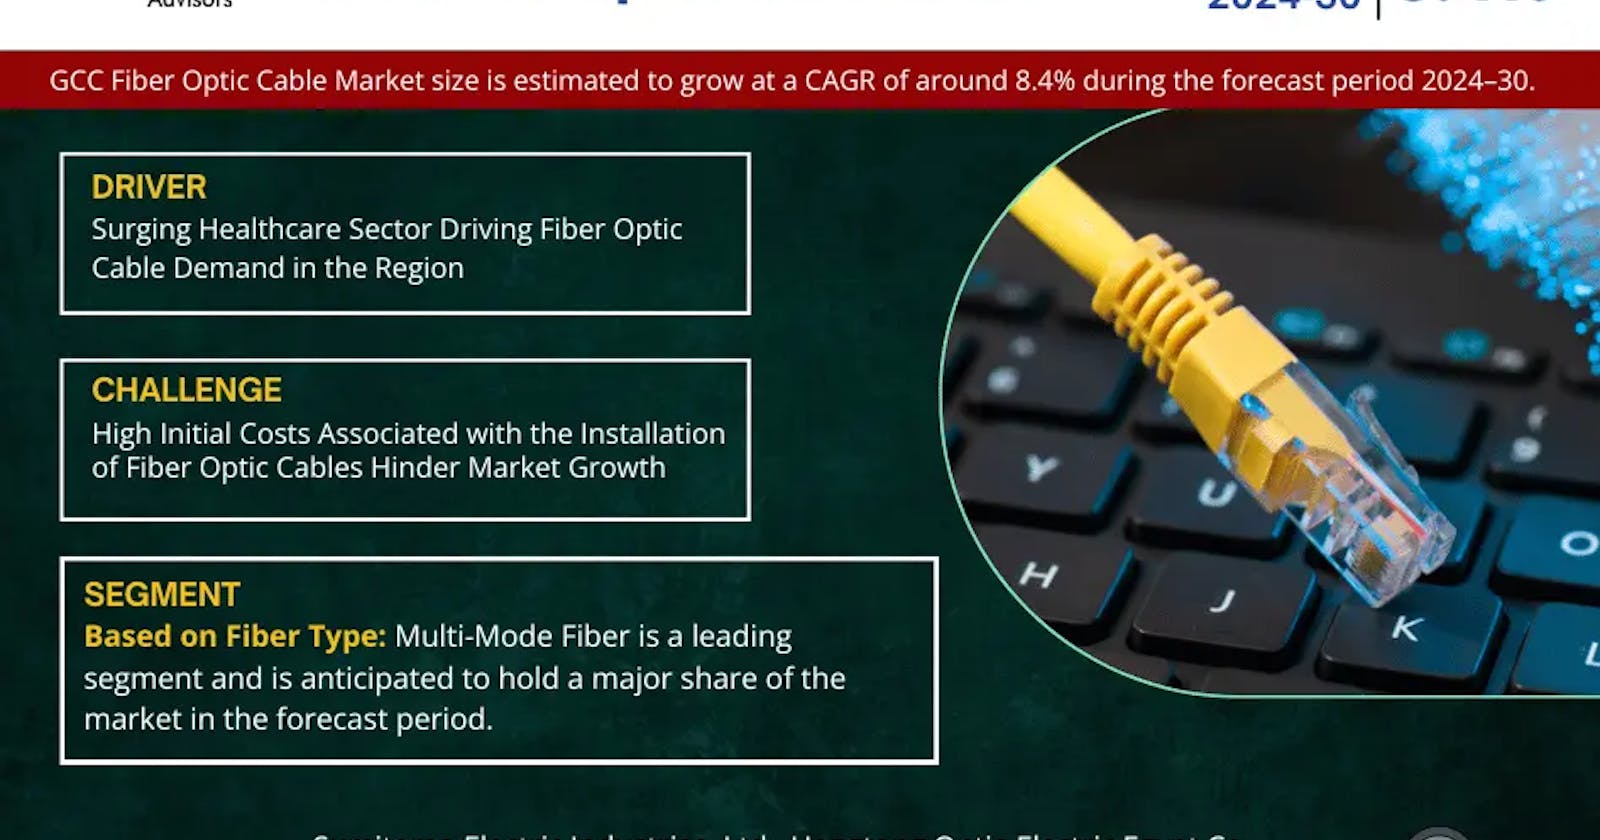 GCC Fiber Optic Cable Market Trends: Analysis of 8.4% CAGR Growth (2024-30)